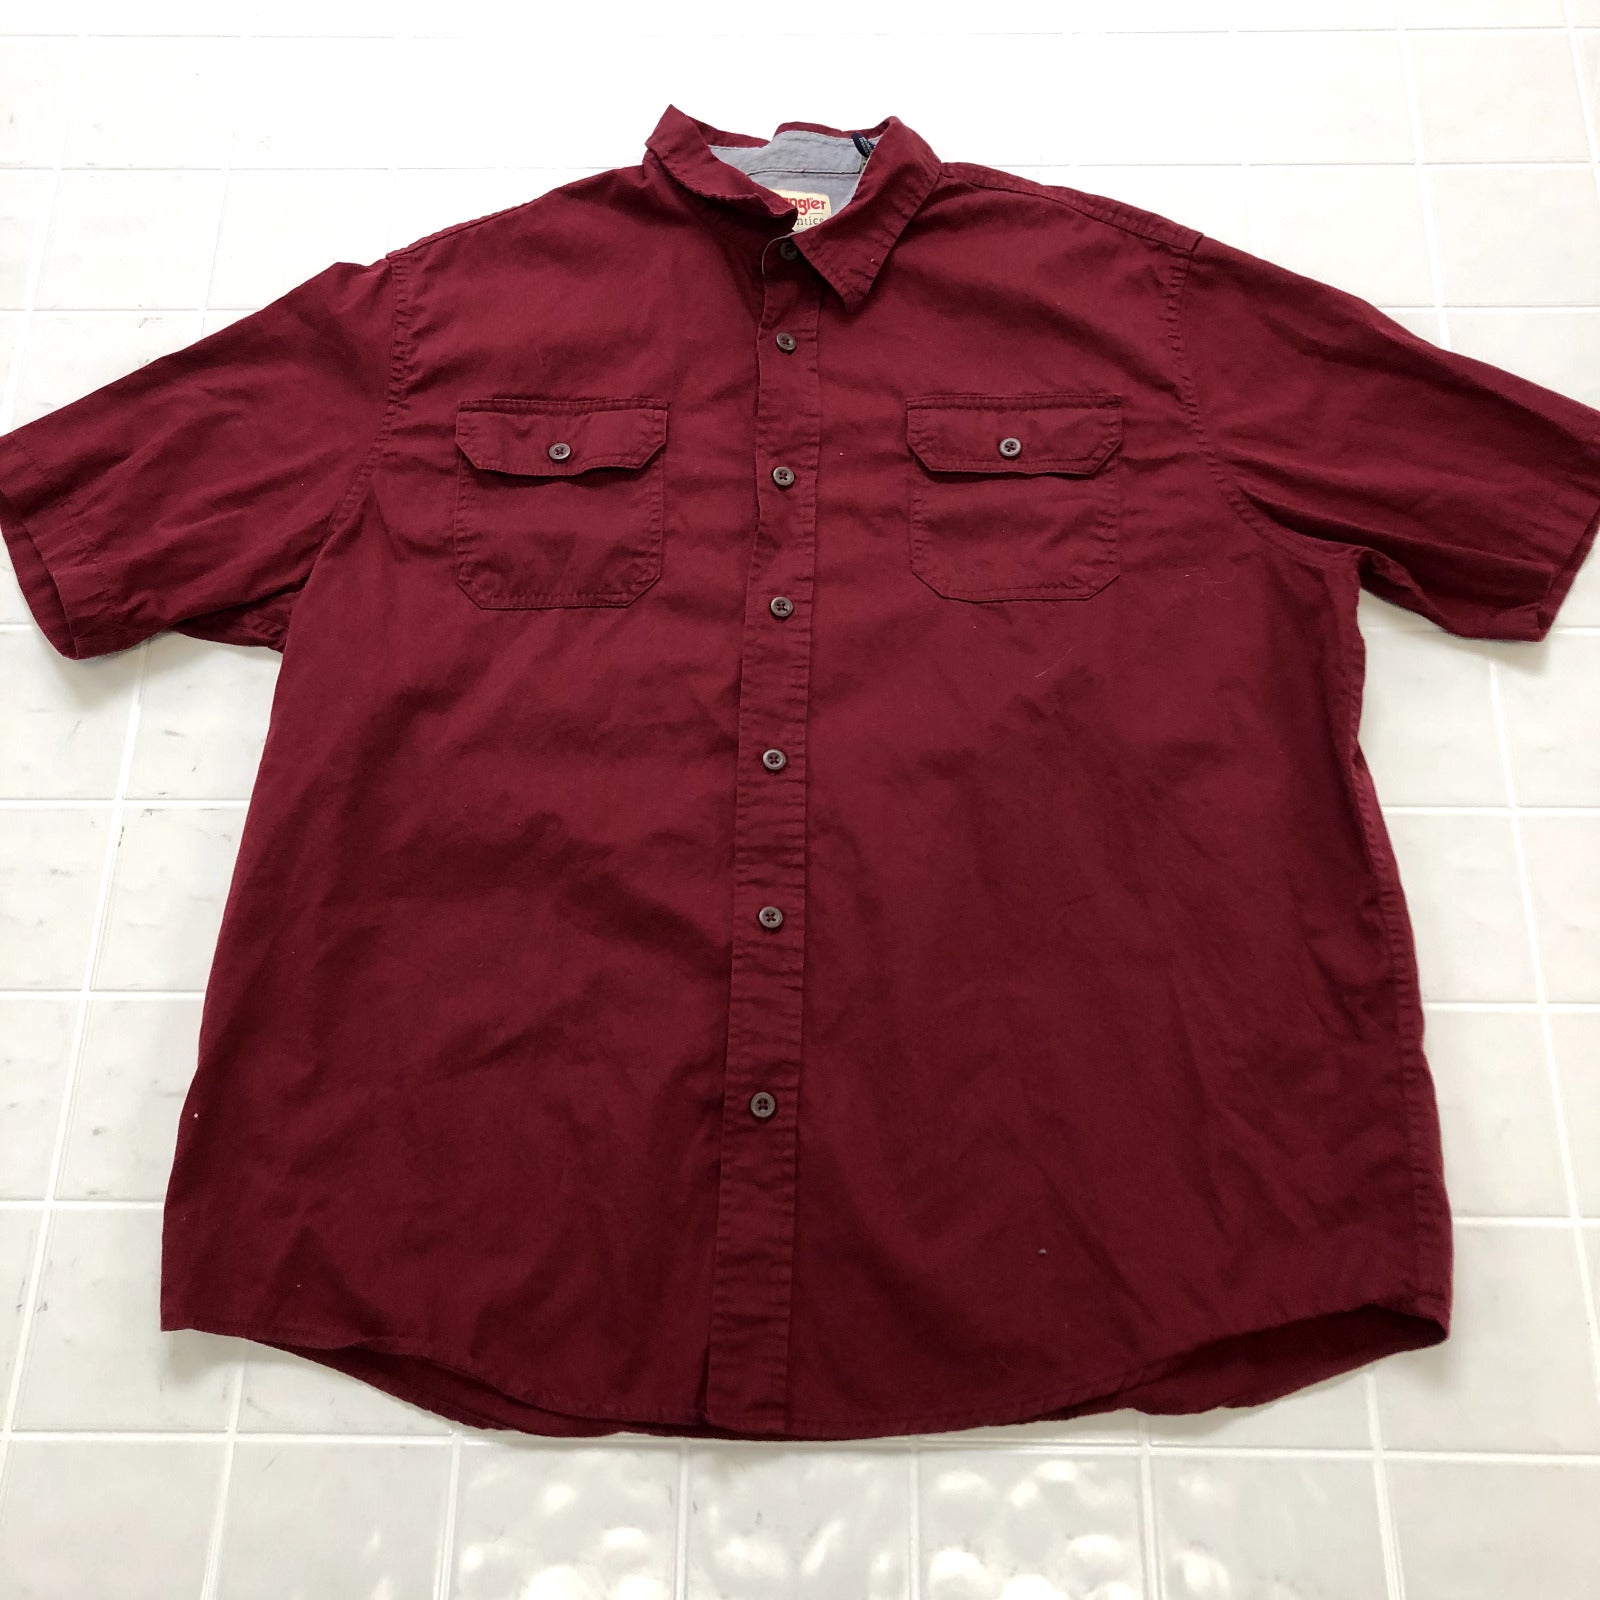 Wrangler Red Double Pocket Regular Fit Cotton Button Up Shirt Adult Size XL